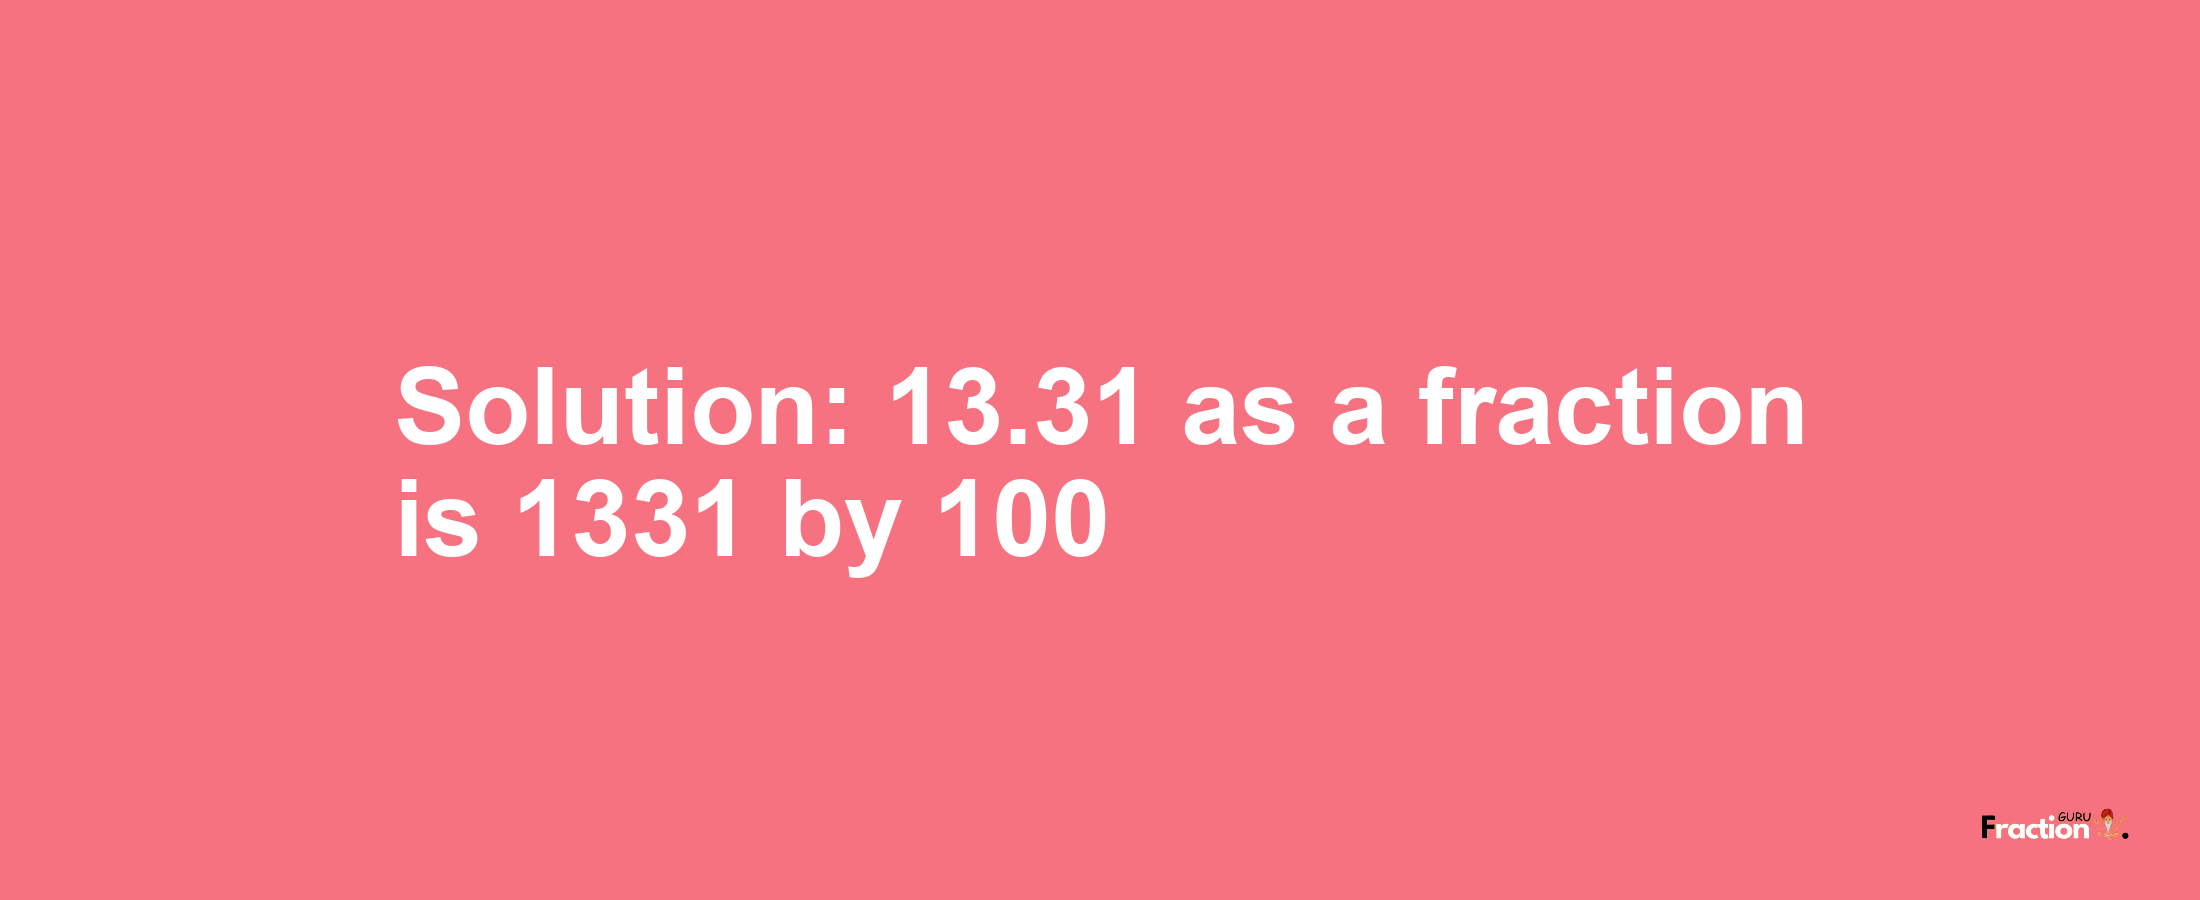 Solution:13.31 as a fraction is 1331/100